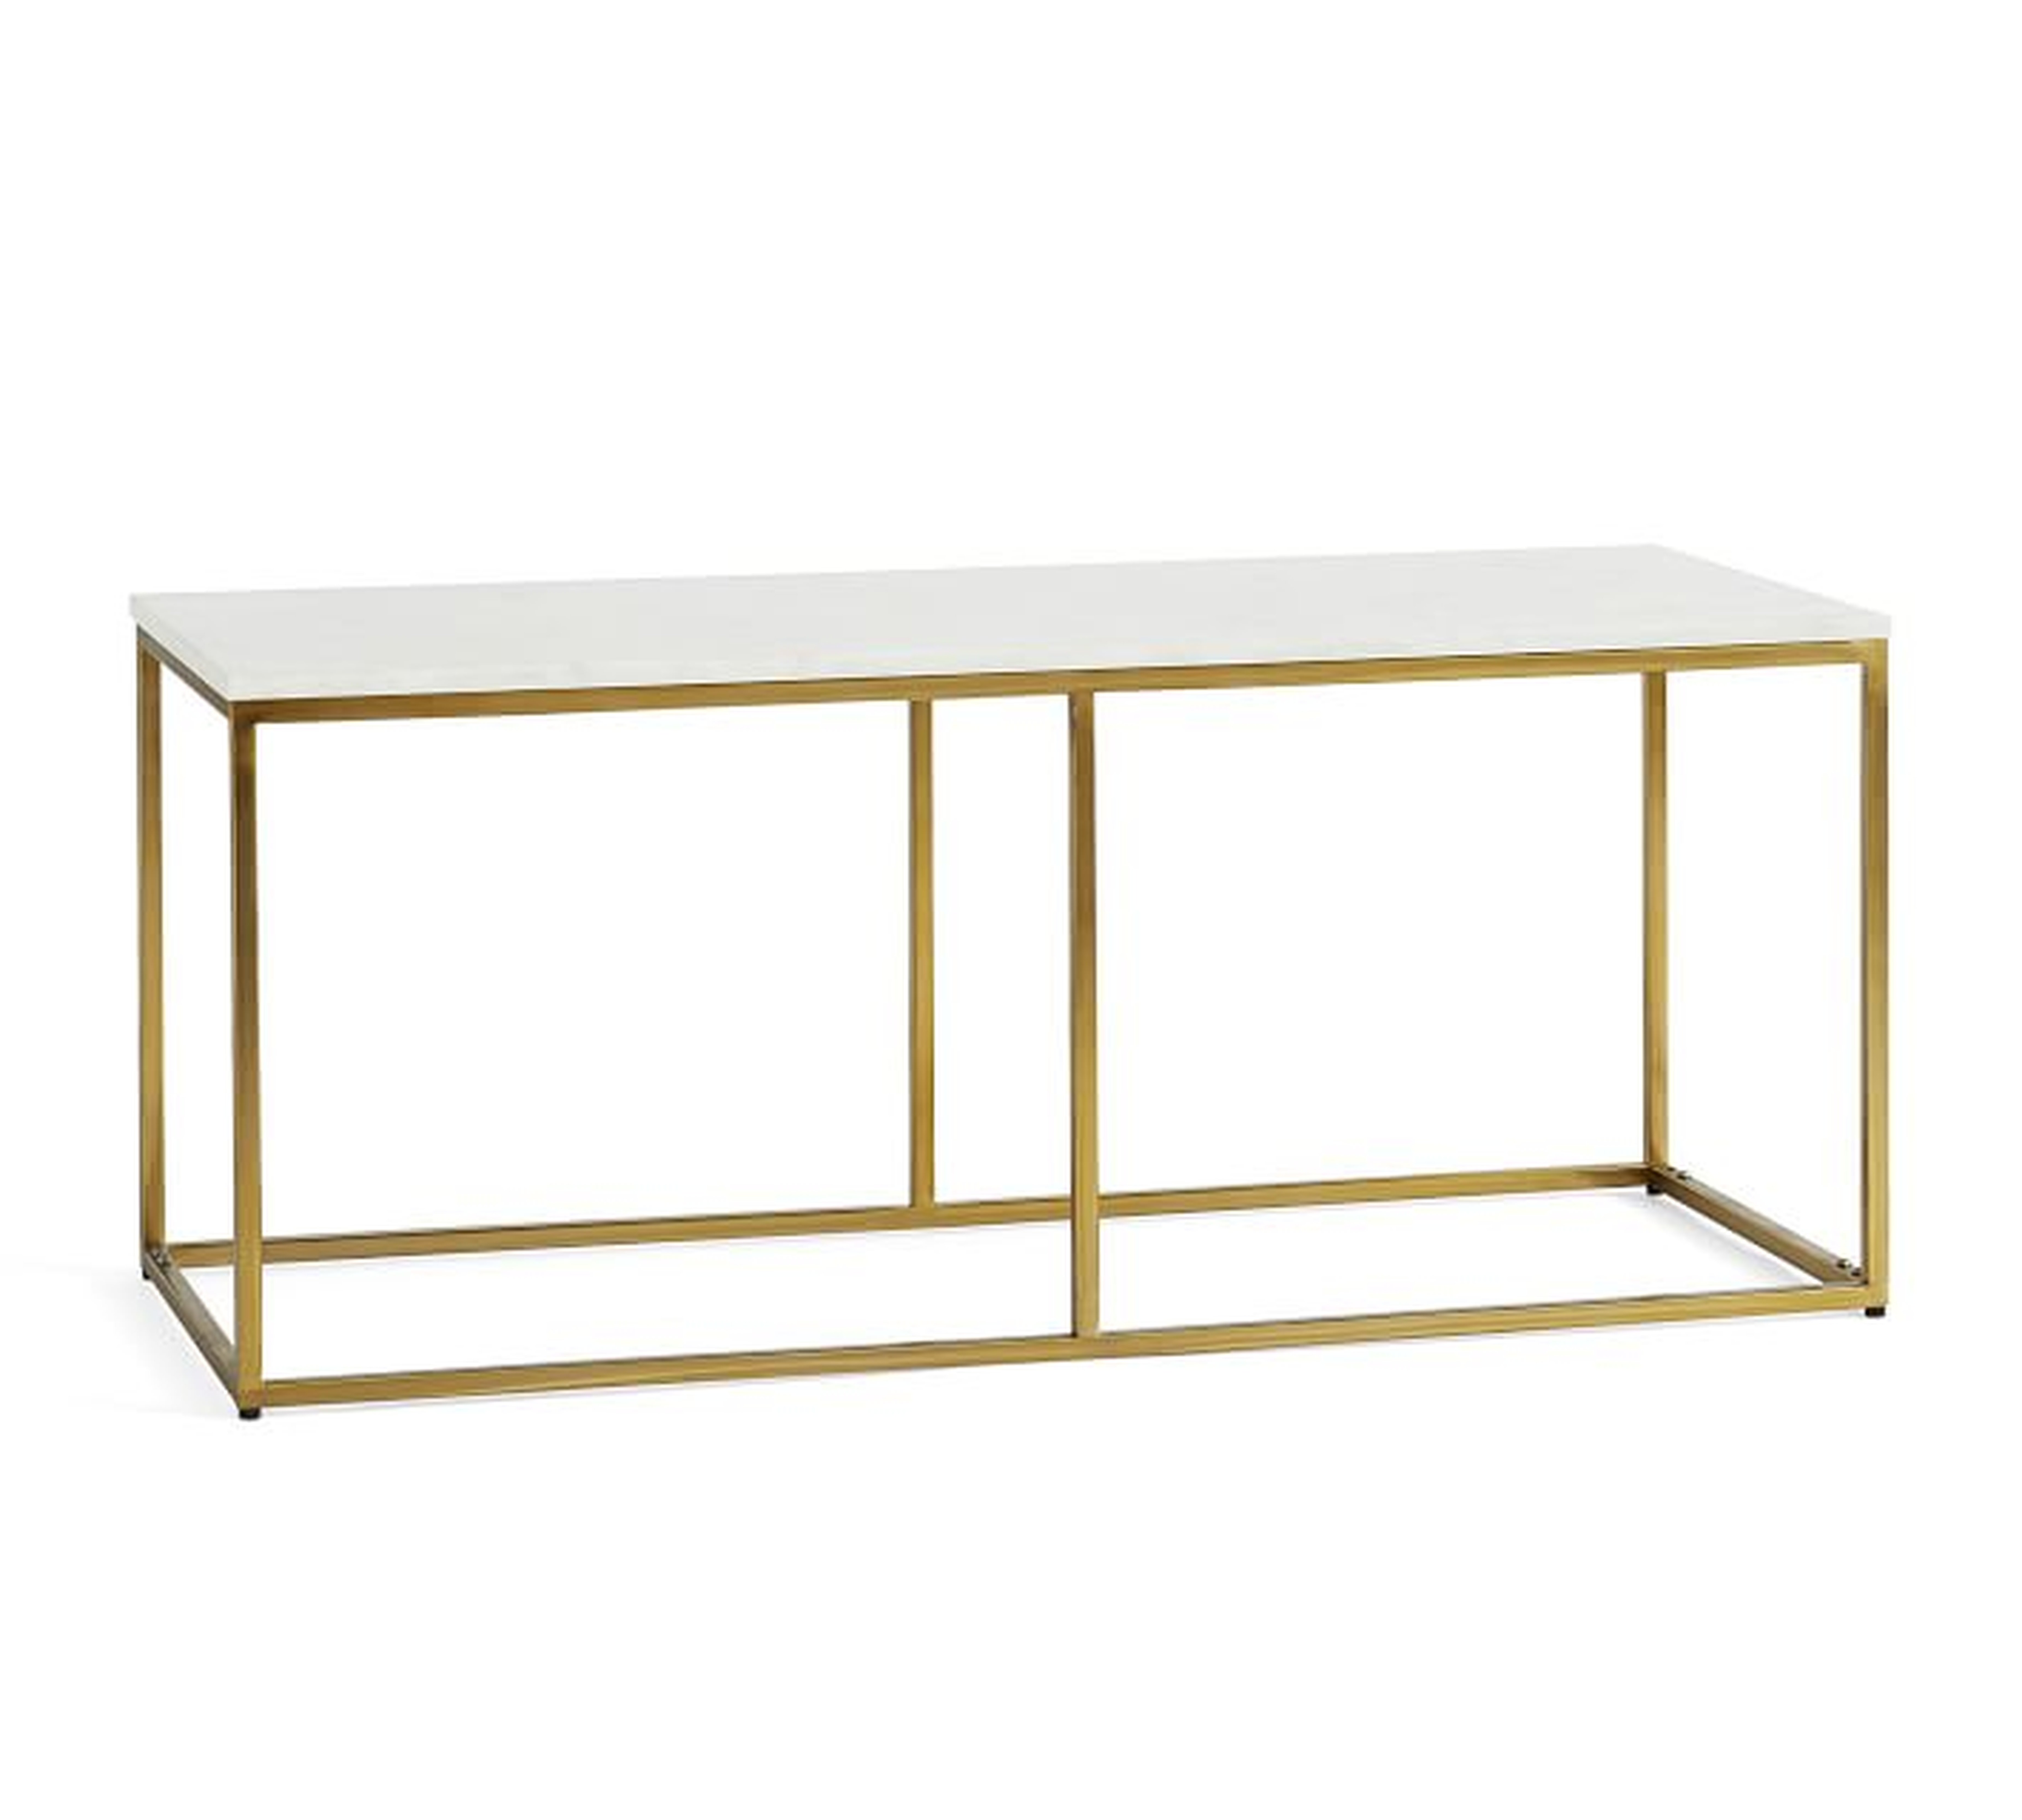 Delaney Marble Rectangular Coffee Table, Antique Brass, 40.5"L - Pottery Barn